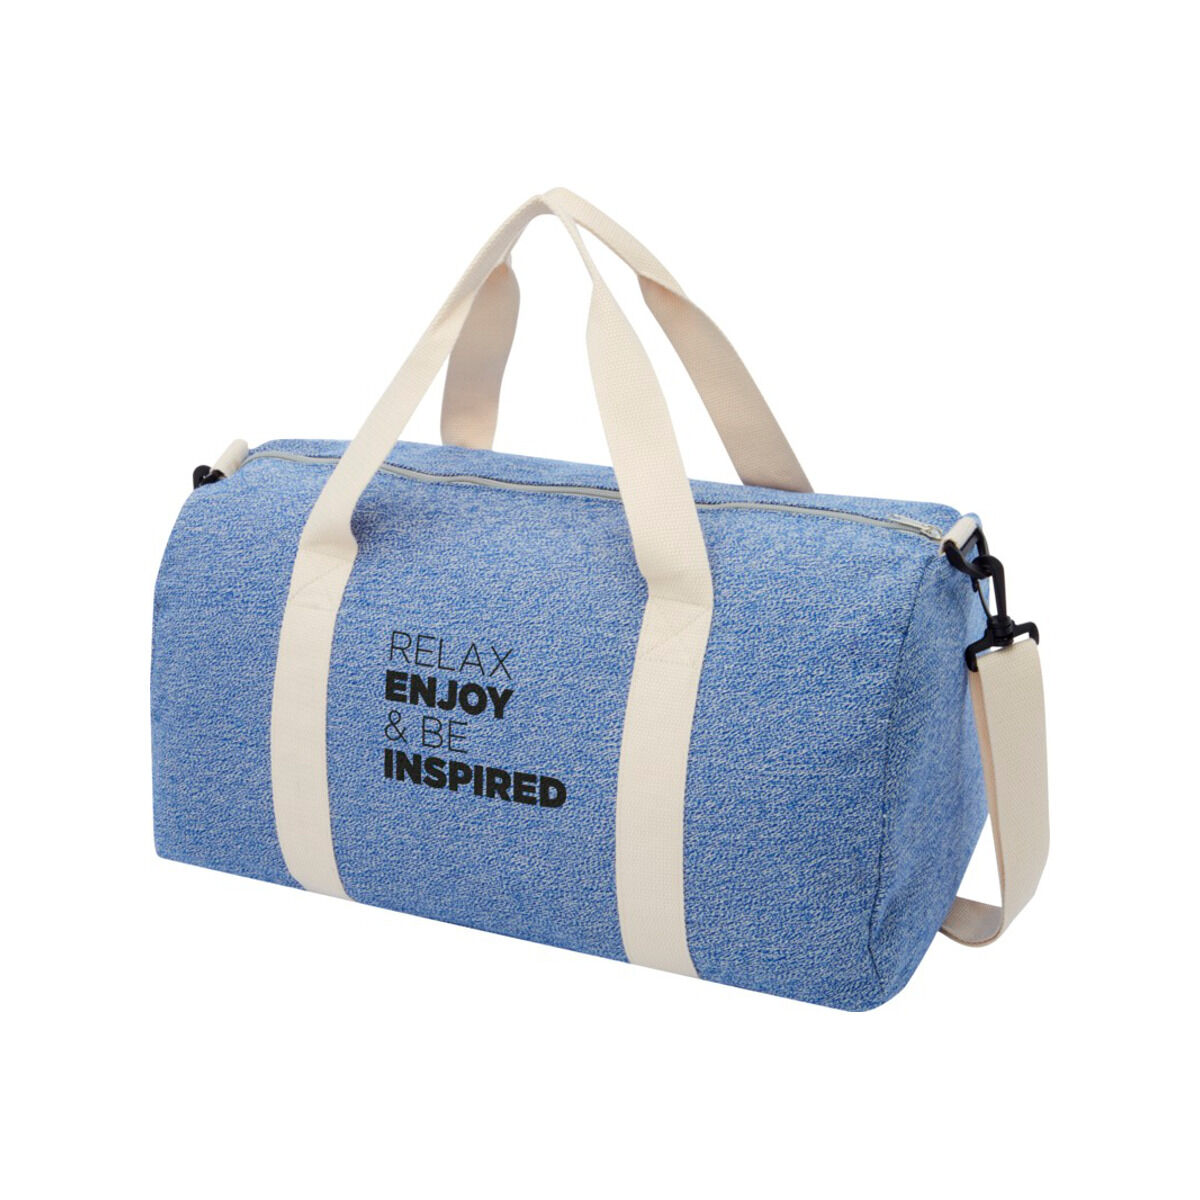 Recycled cotton and polyester duffel bag (sample branding)